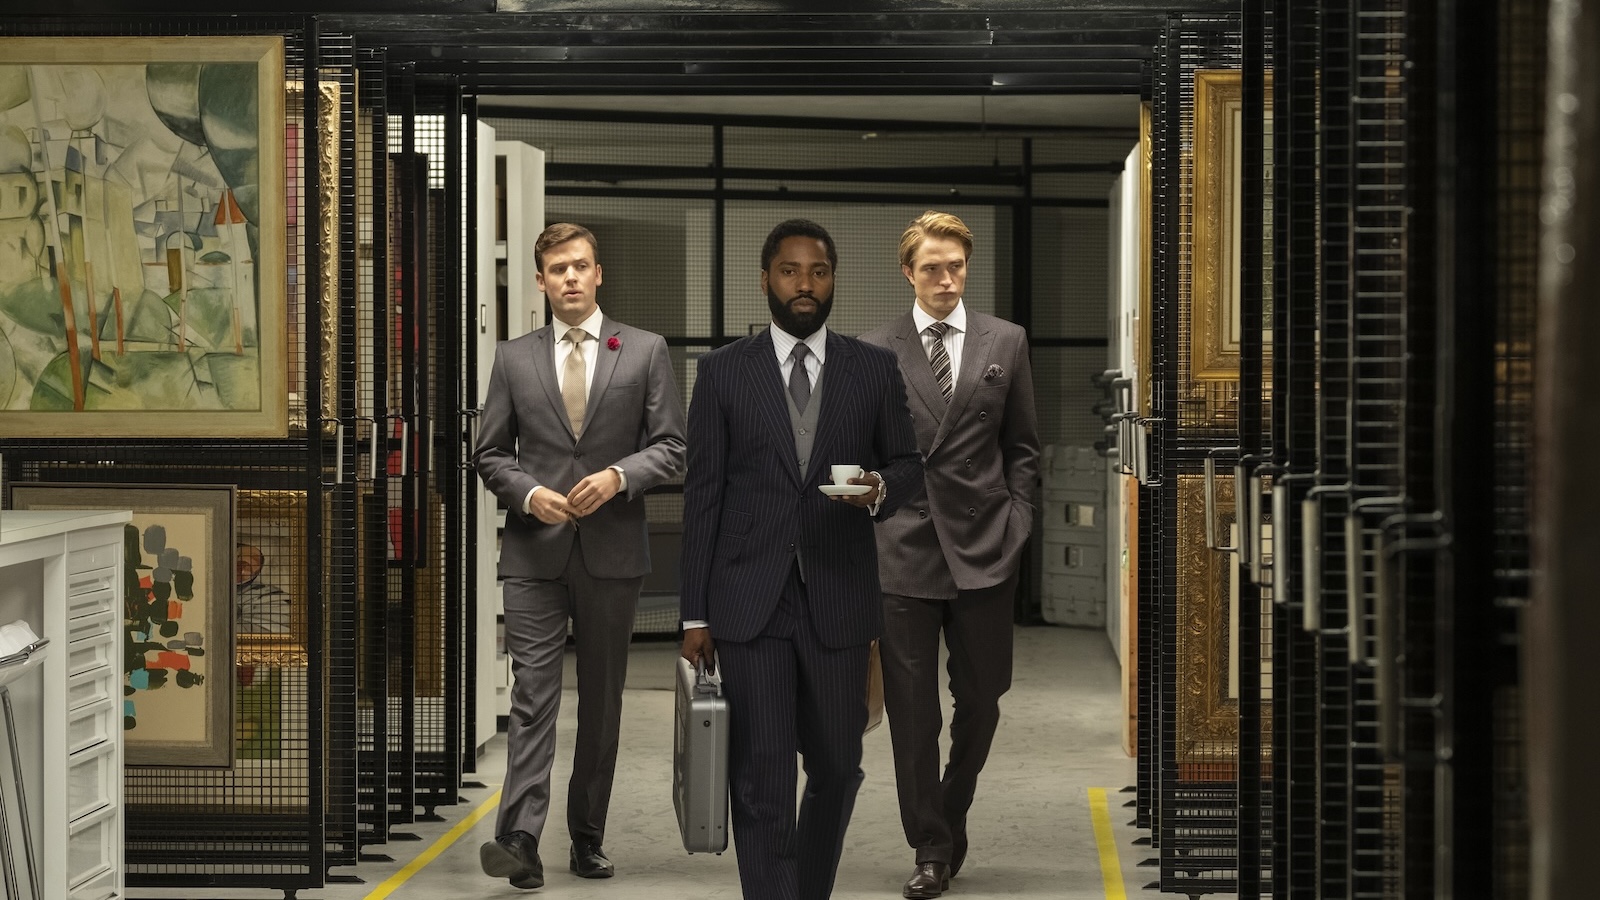 Three men in suits walk towards a camera in a storage room filled with paintings. The man in front carries a teacup and a suitcase.